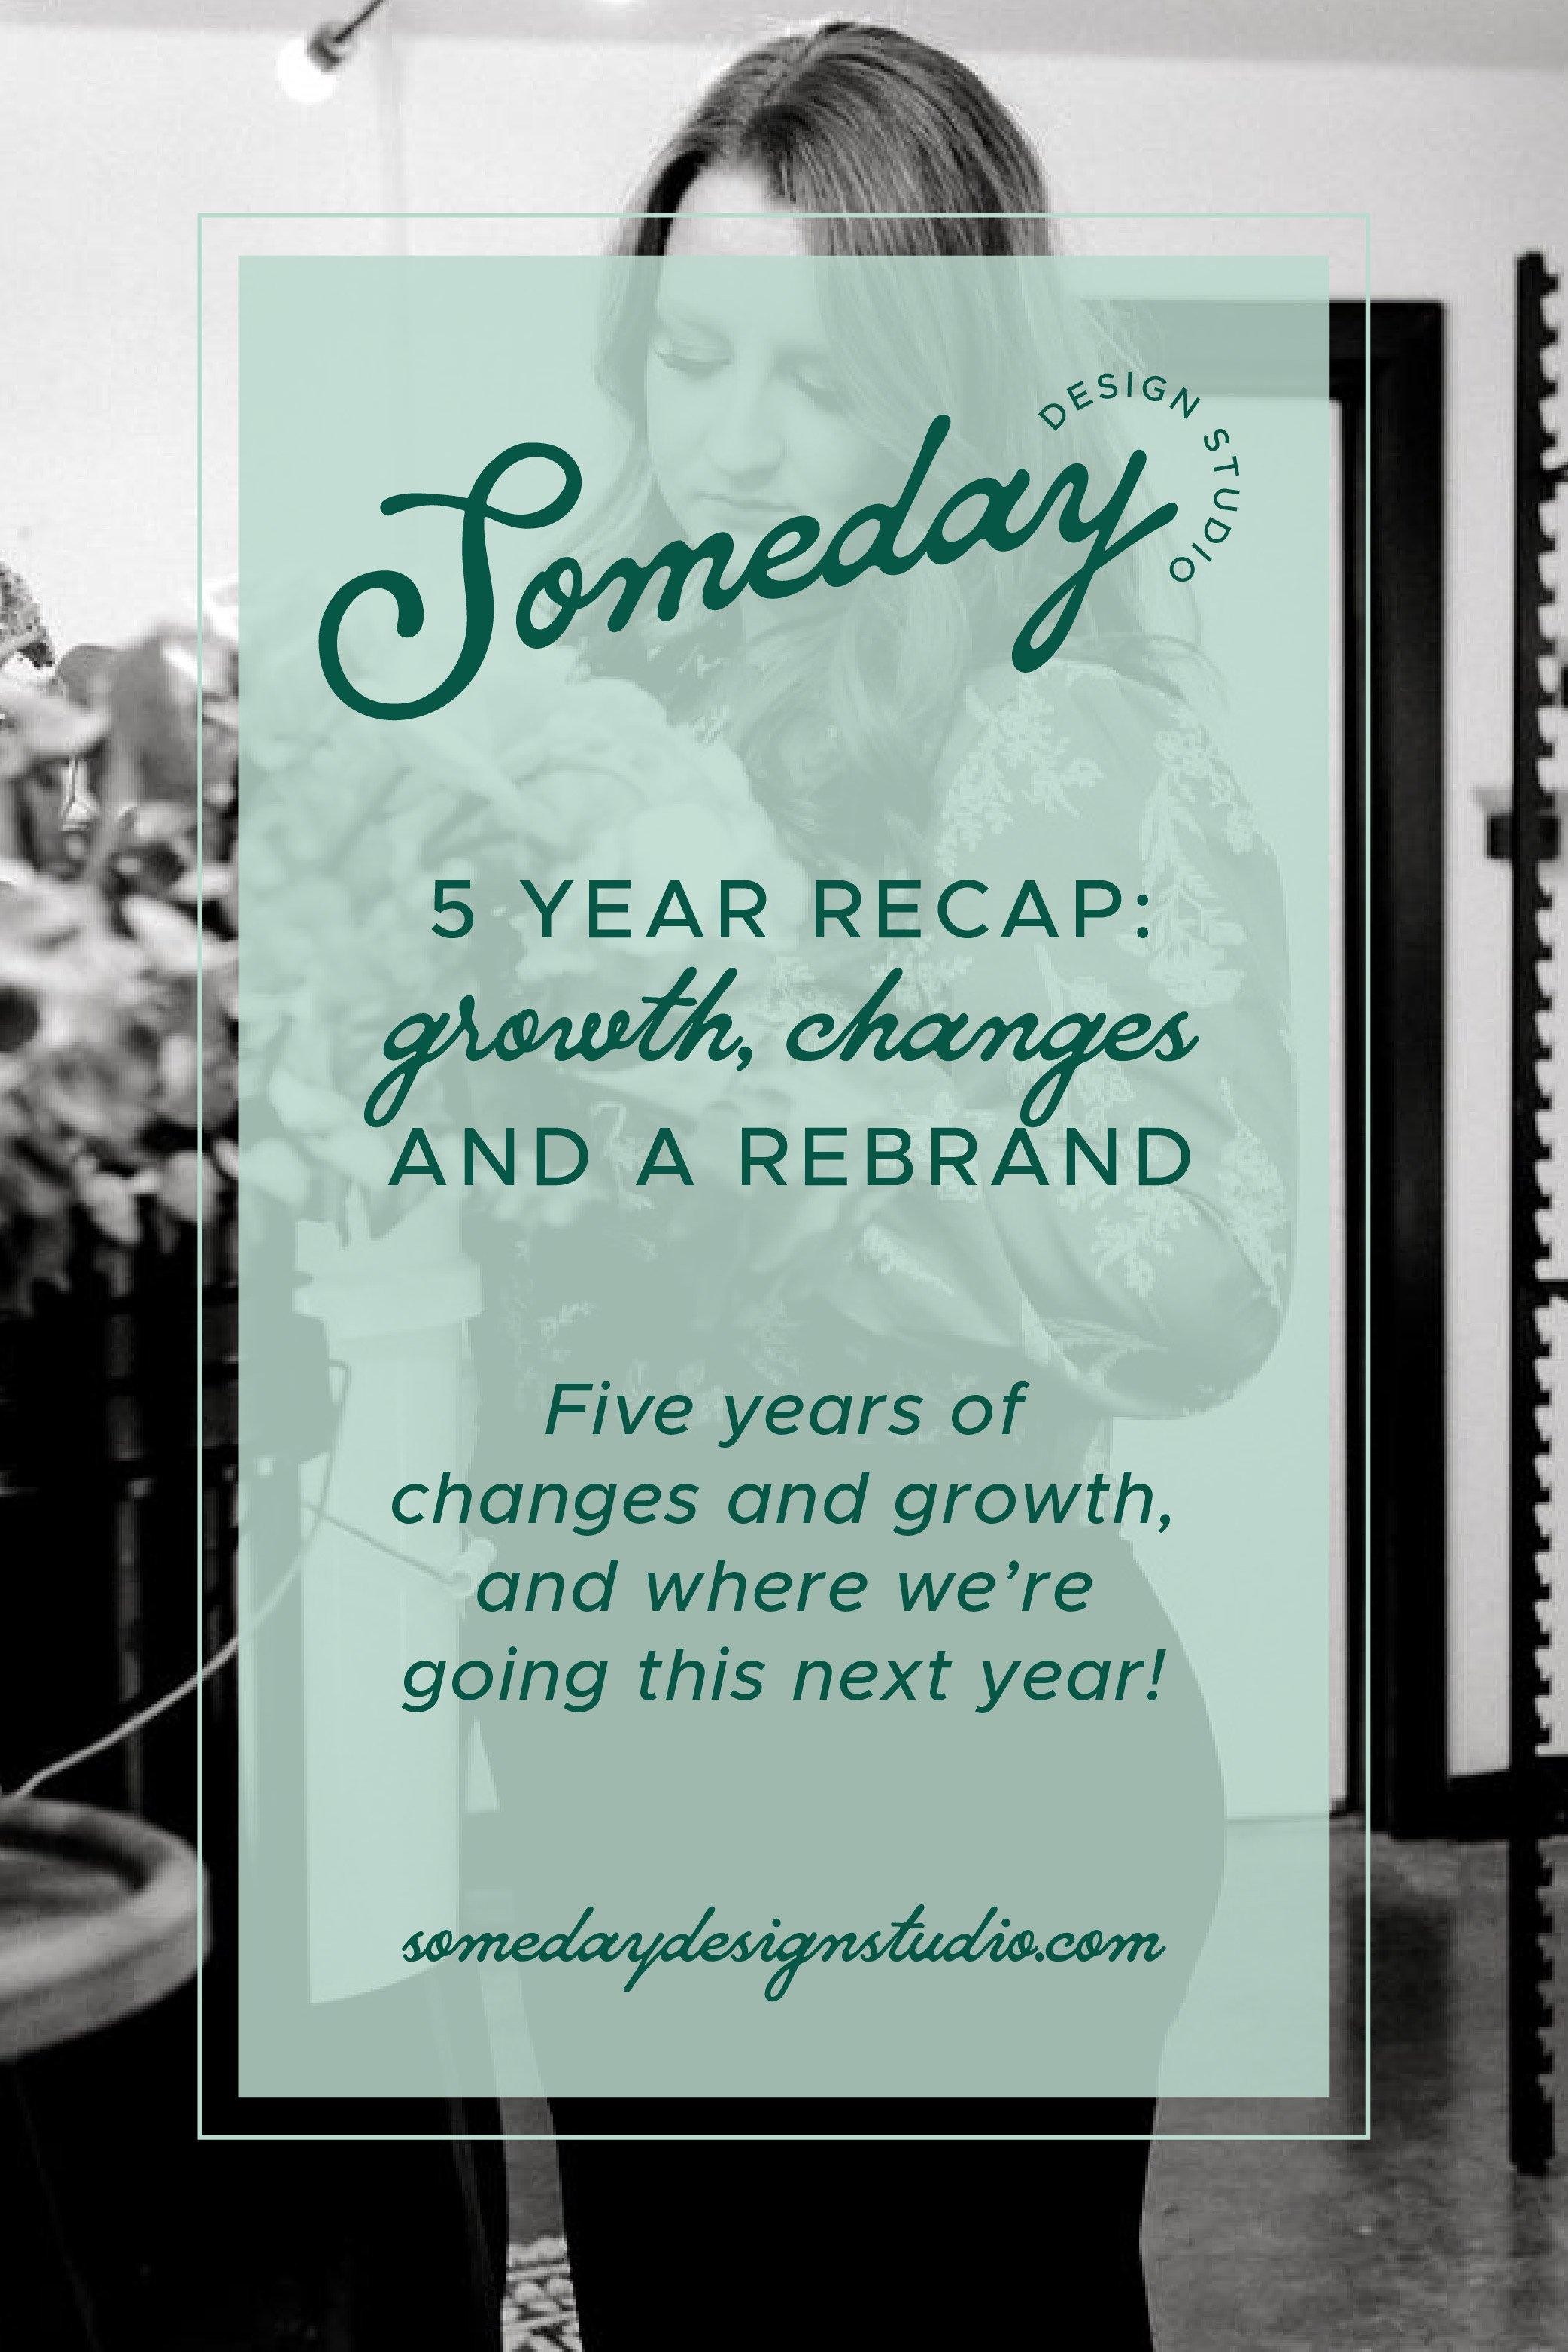  See the changes for this design business in five years! Someday Design Studio montana graphic design helena montana custom branding and logo design #somedaydesignstudio #montanagraphicdesign #helena #montana #brandingdesign #logodesign #customgraphi